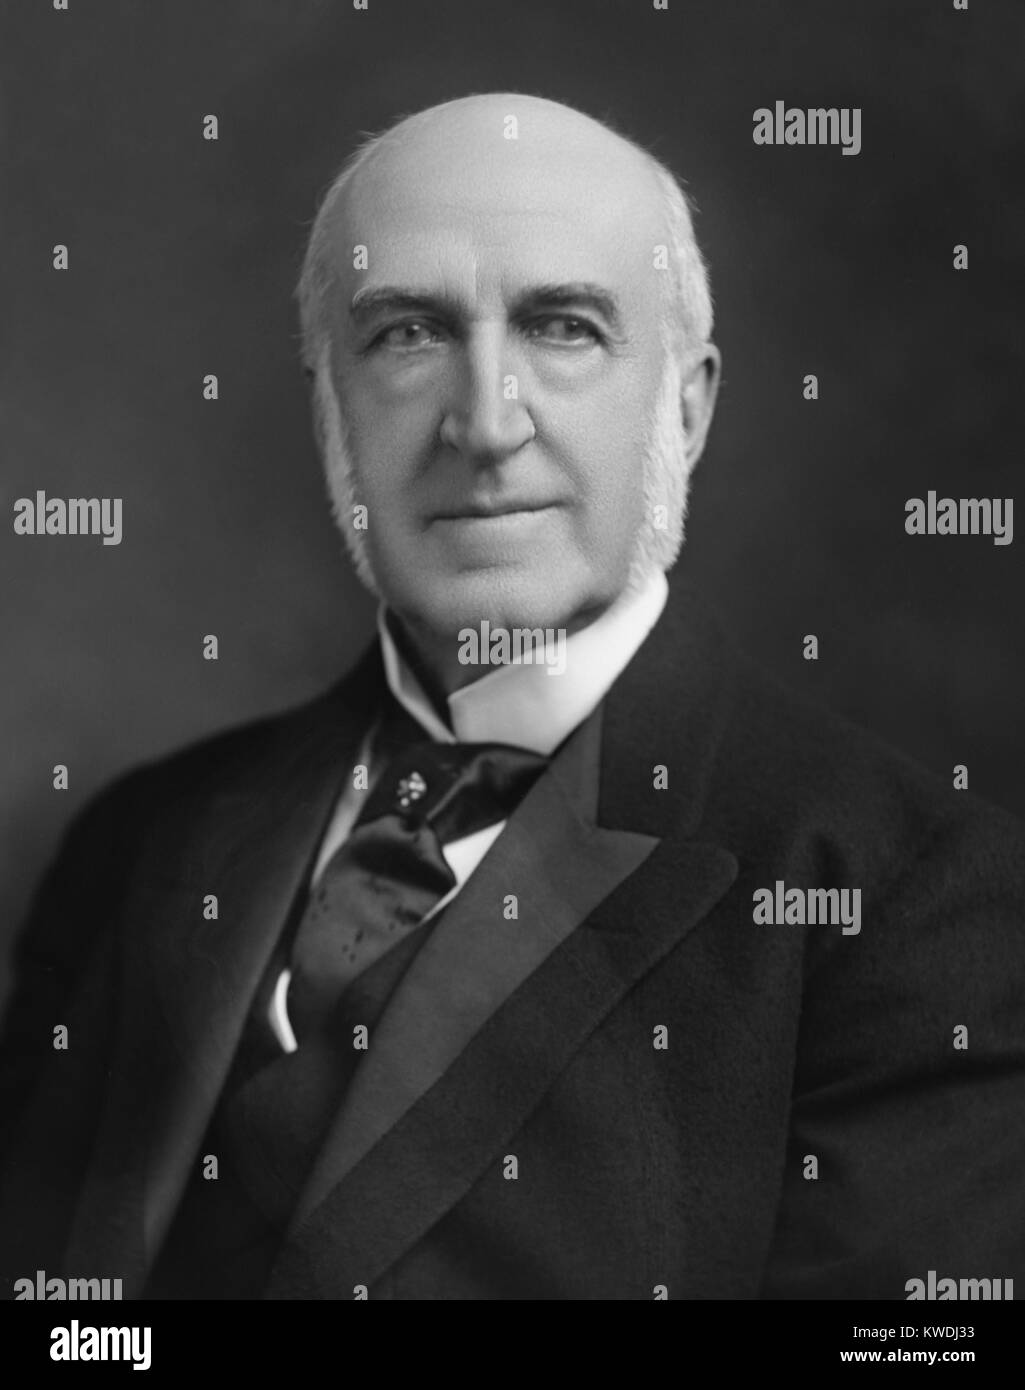 Senator Chauncey Depew, Republican from New York from 1899-1911. Before he was served as a conservative Senator, he was a corporate lawyer for the New York Central Railroad who served on several railroad boards of directors (BSLOC 2017 8 85) Stock Photo